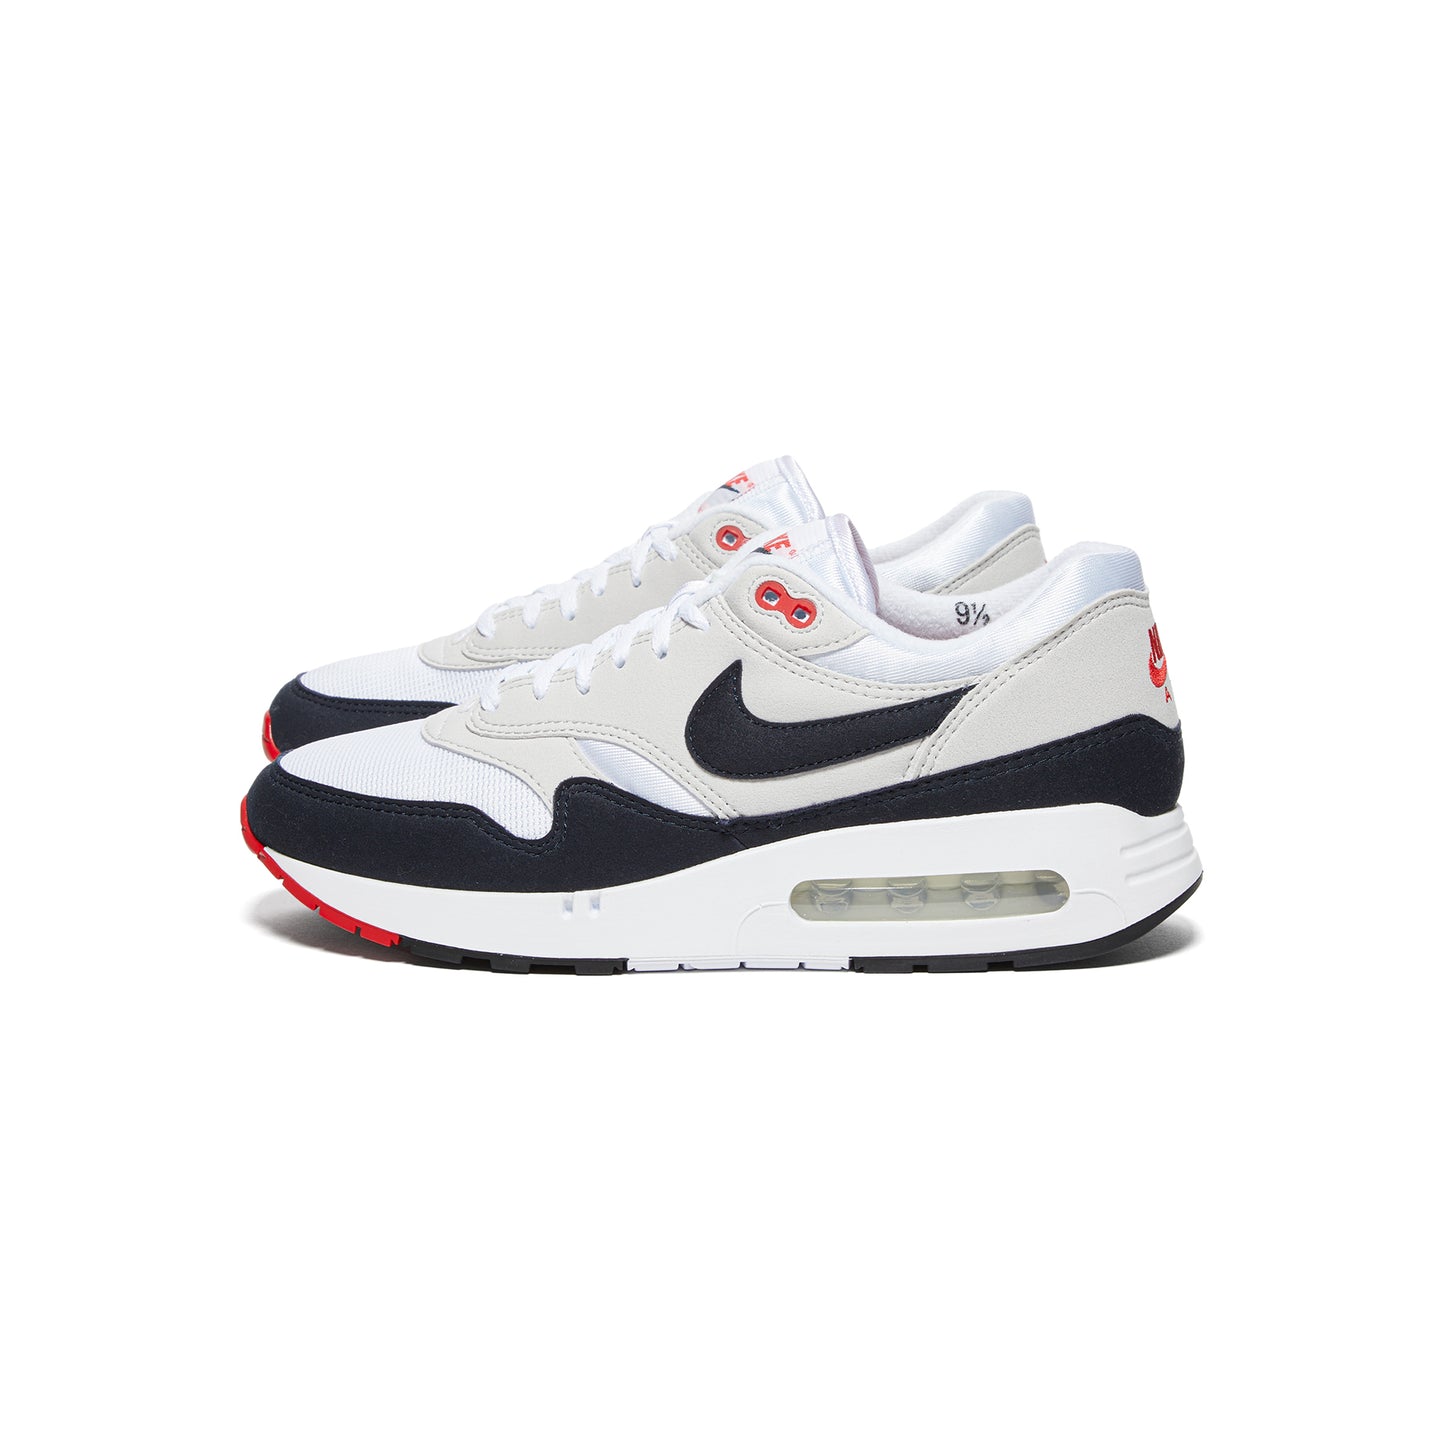 MODEL：AIR MAX 1 LV8 COLOR：WHITE/OBSIDIAN-WOLF GREY-BLACK YEAR